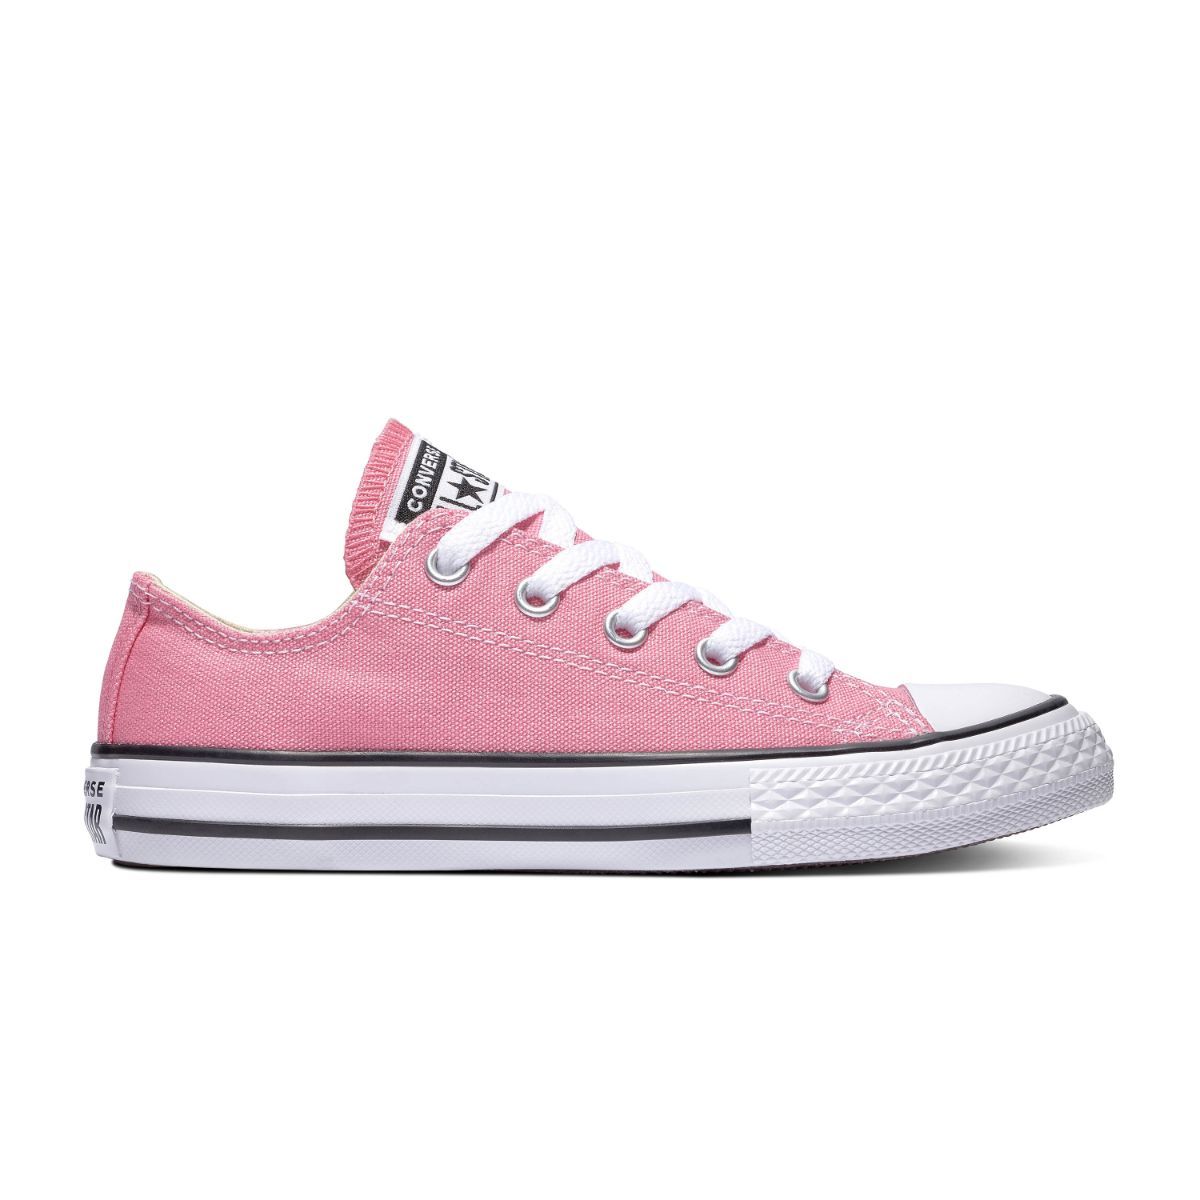 Little Kids Chuck Taylor All Star Pink Low Top